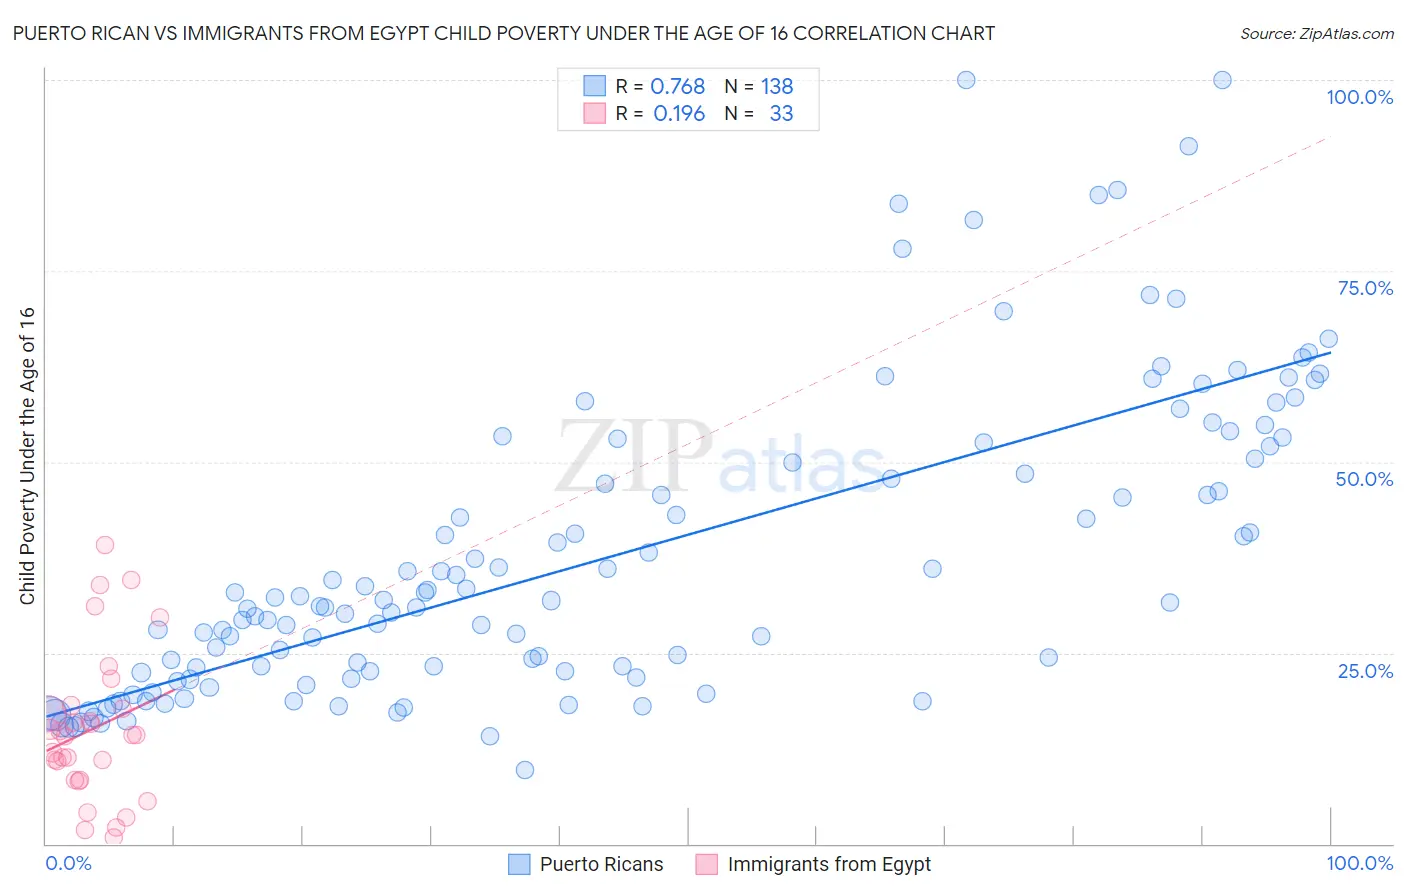 Puerto Rican vs Immigrants from Egypt Child Poverty Under the Age of 16